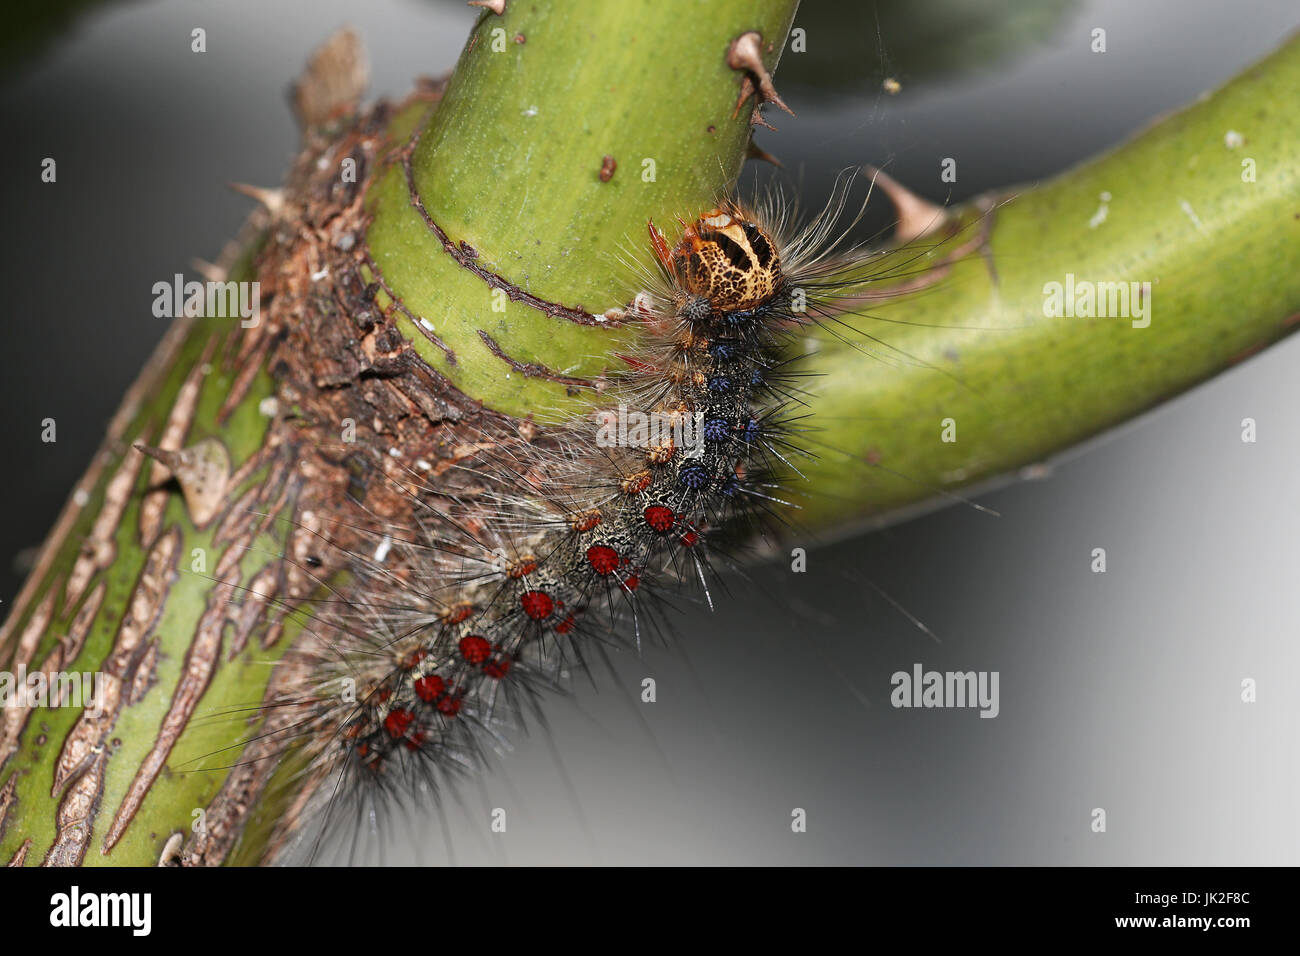 Gypsy moth, Lymantria Dispar, in its caterpillar state: one of the most destructive pests of hardwood trees Stock Photo